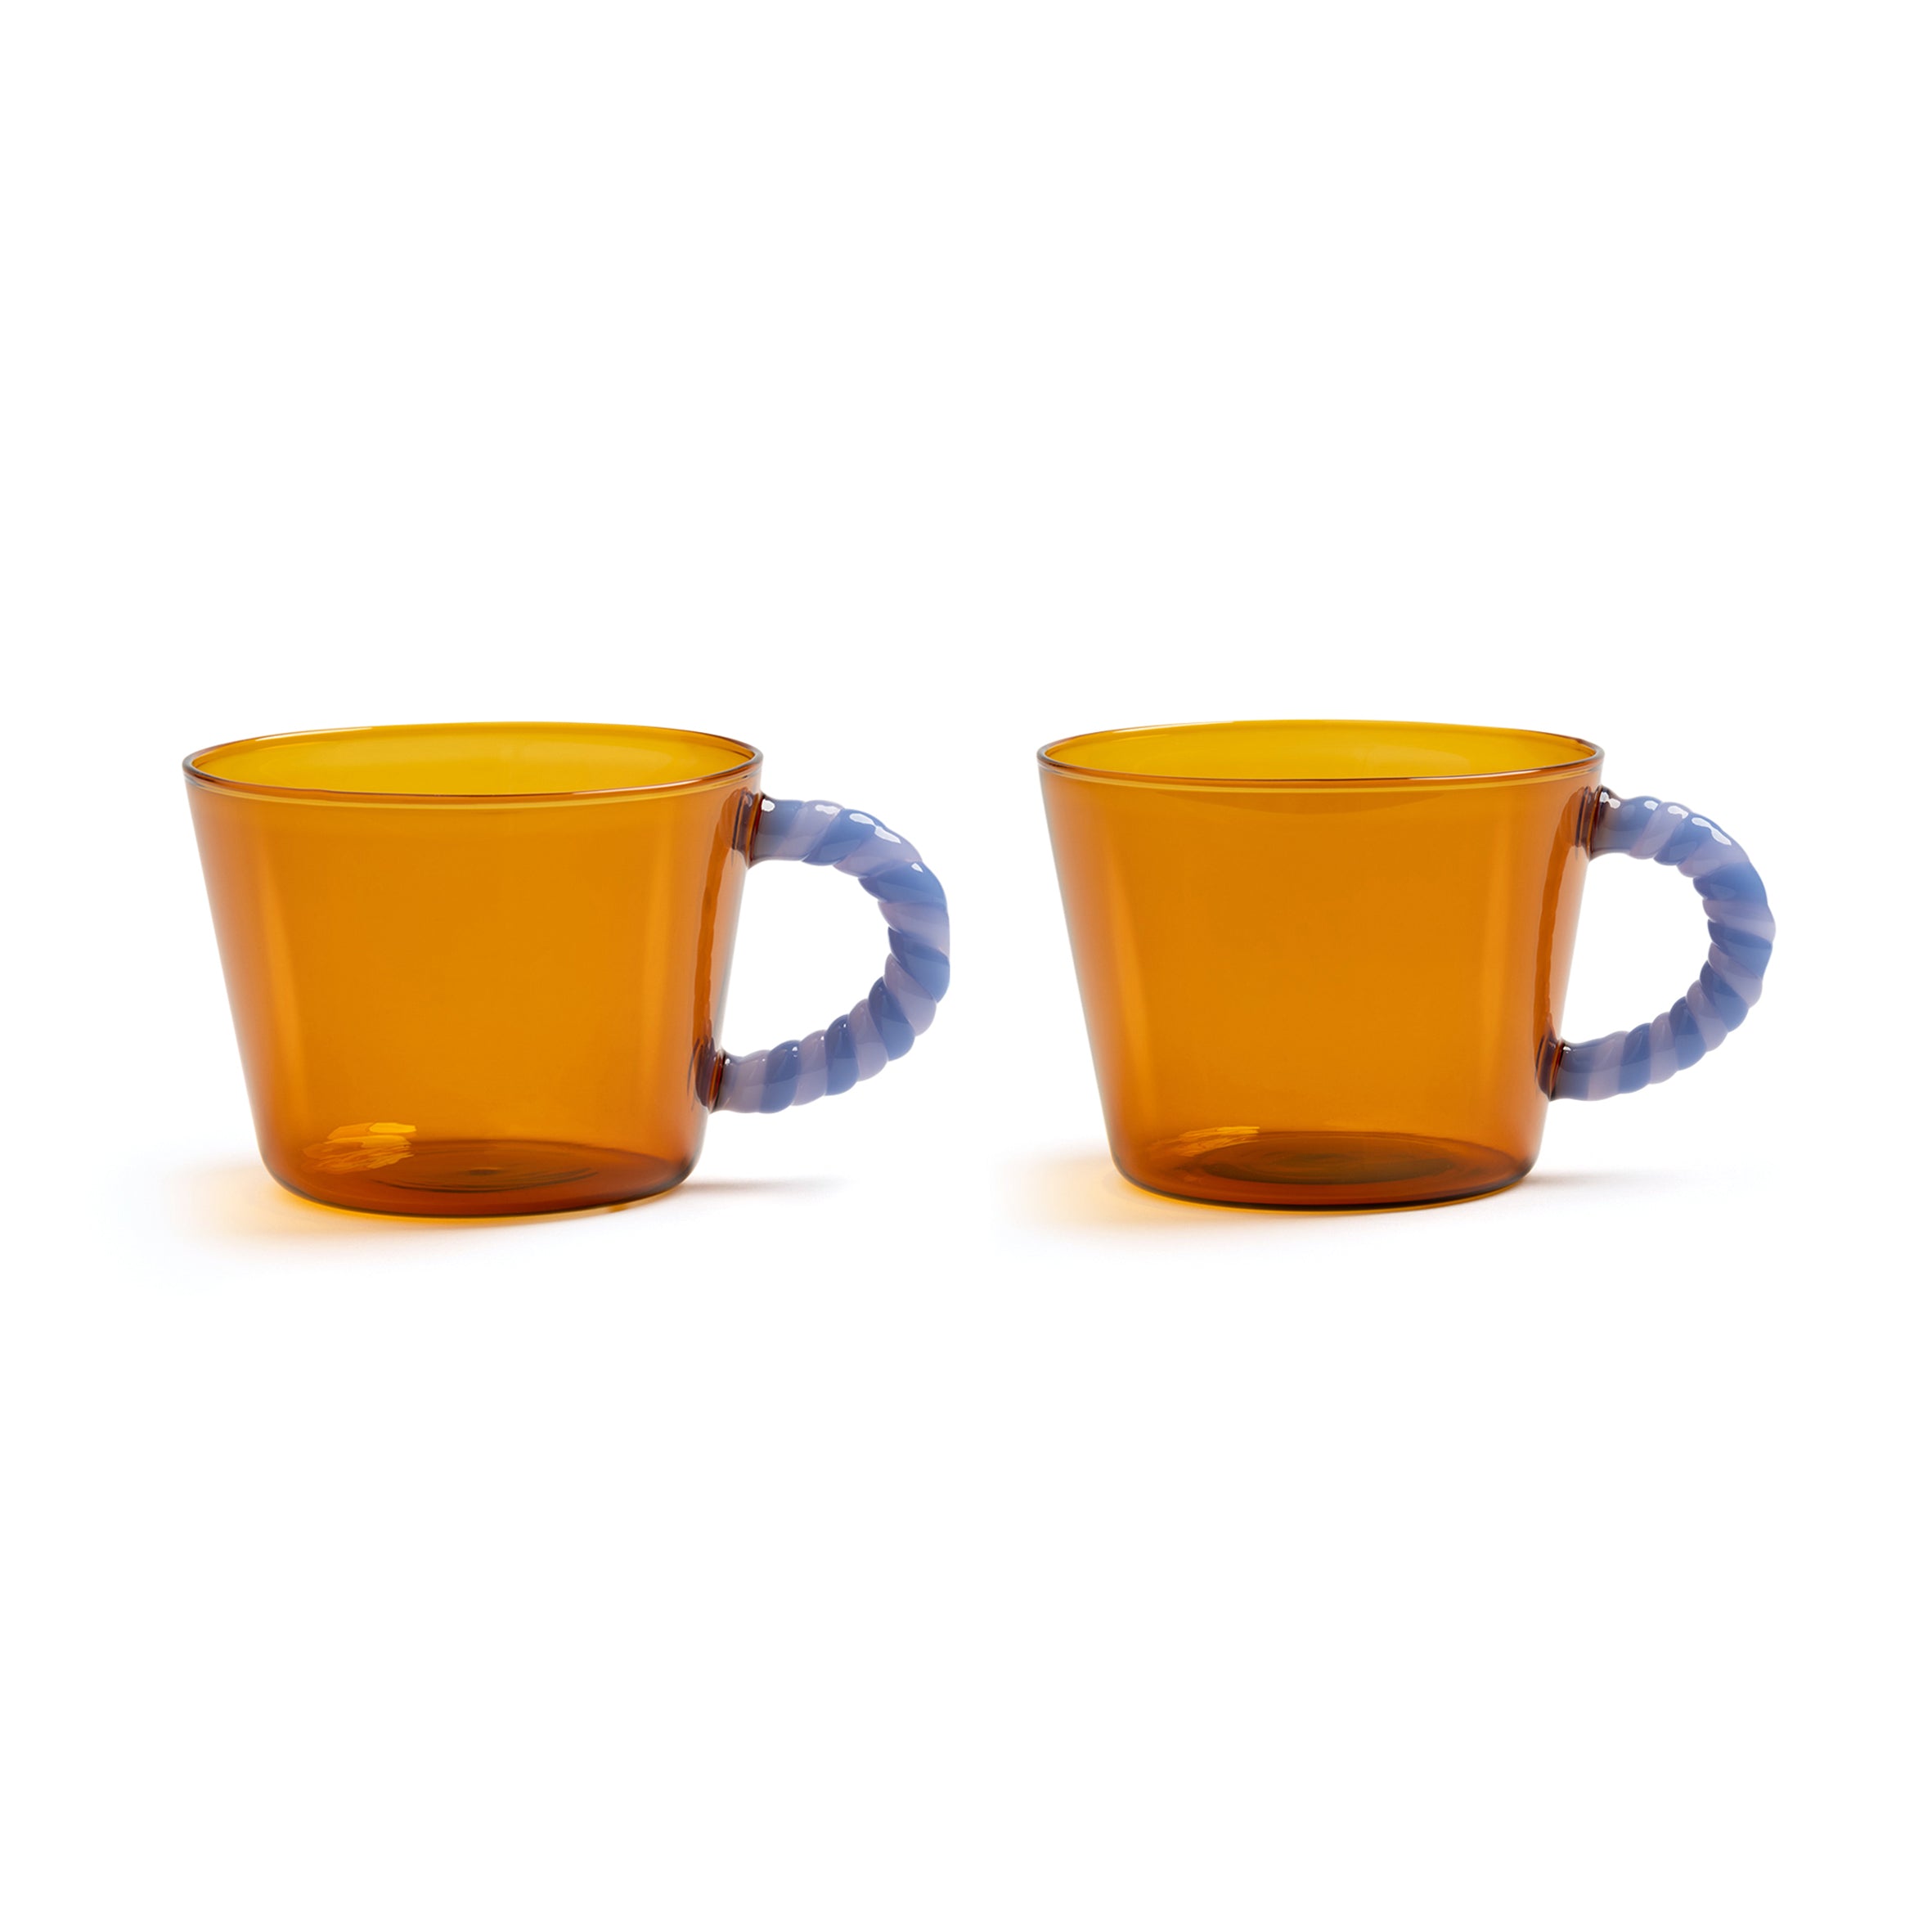 tea or coffee from this fancy duet glass set of 2. The duet glasses playful look will ensure you enjoy, shop the best Ramadan gift gifts for her for him from Inna carton online store dubai, UAE!